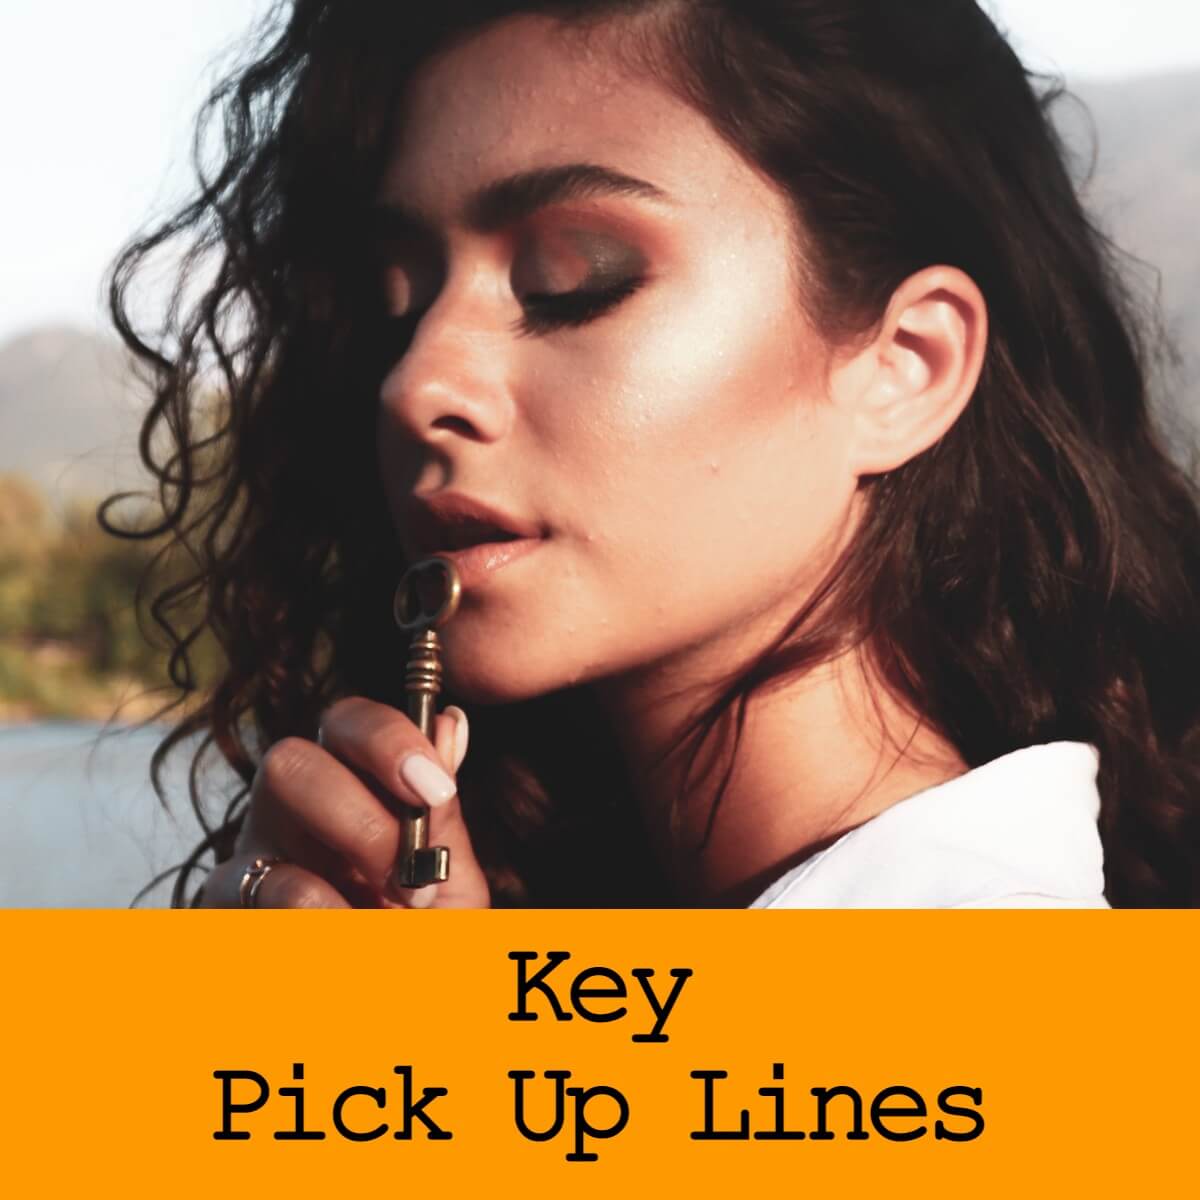 Pick Up Lines Related to Keys